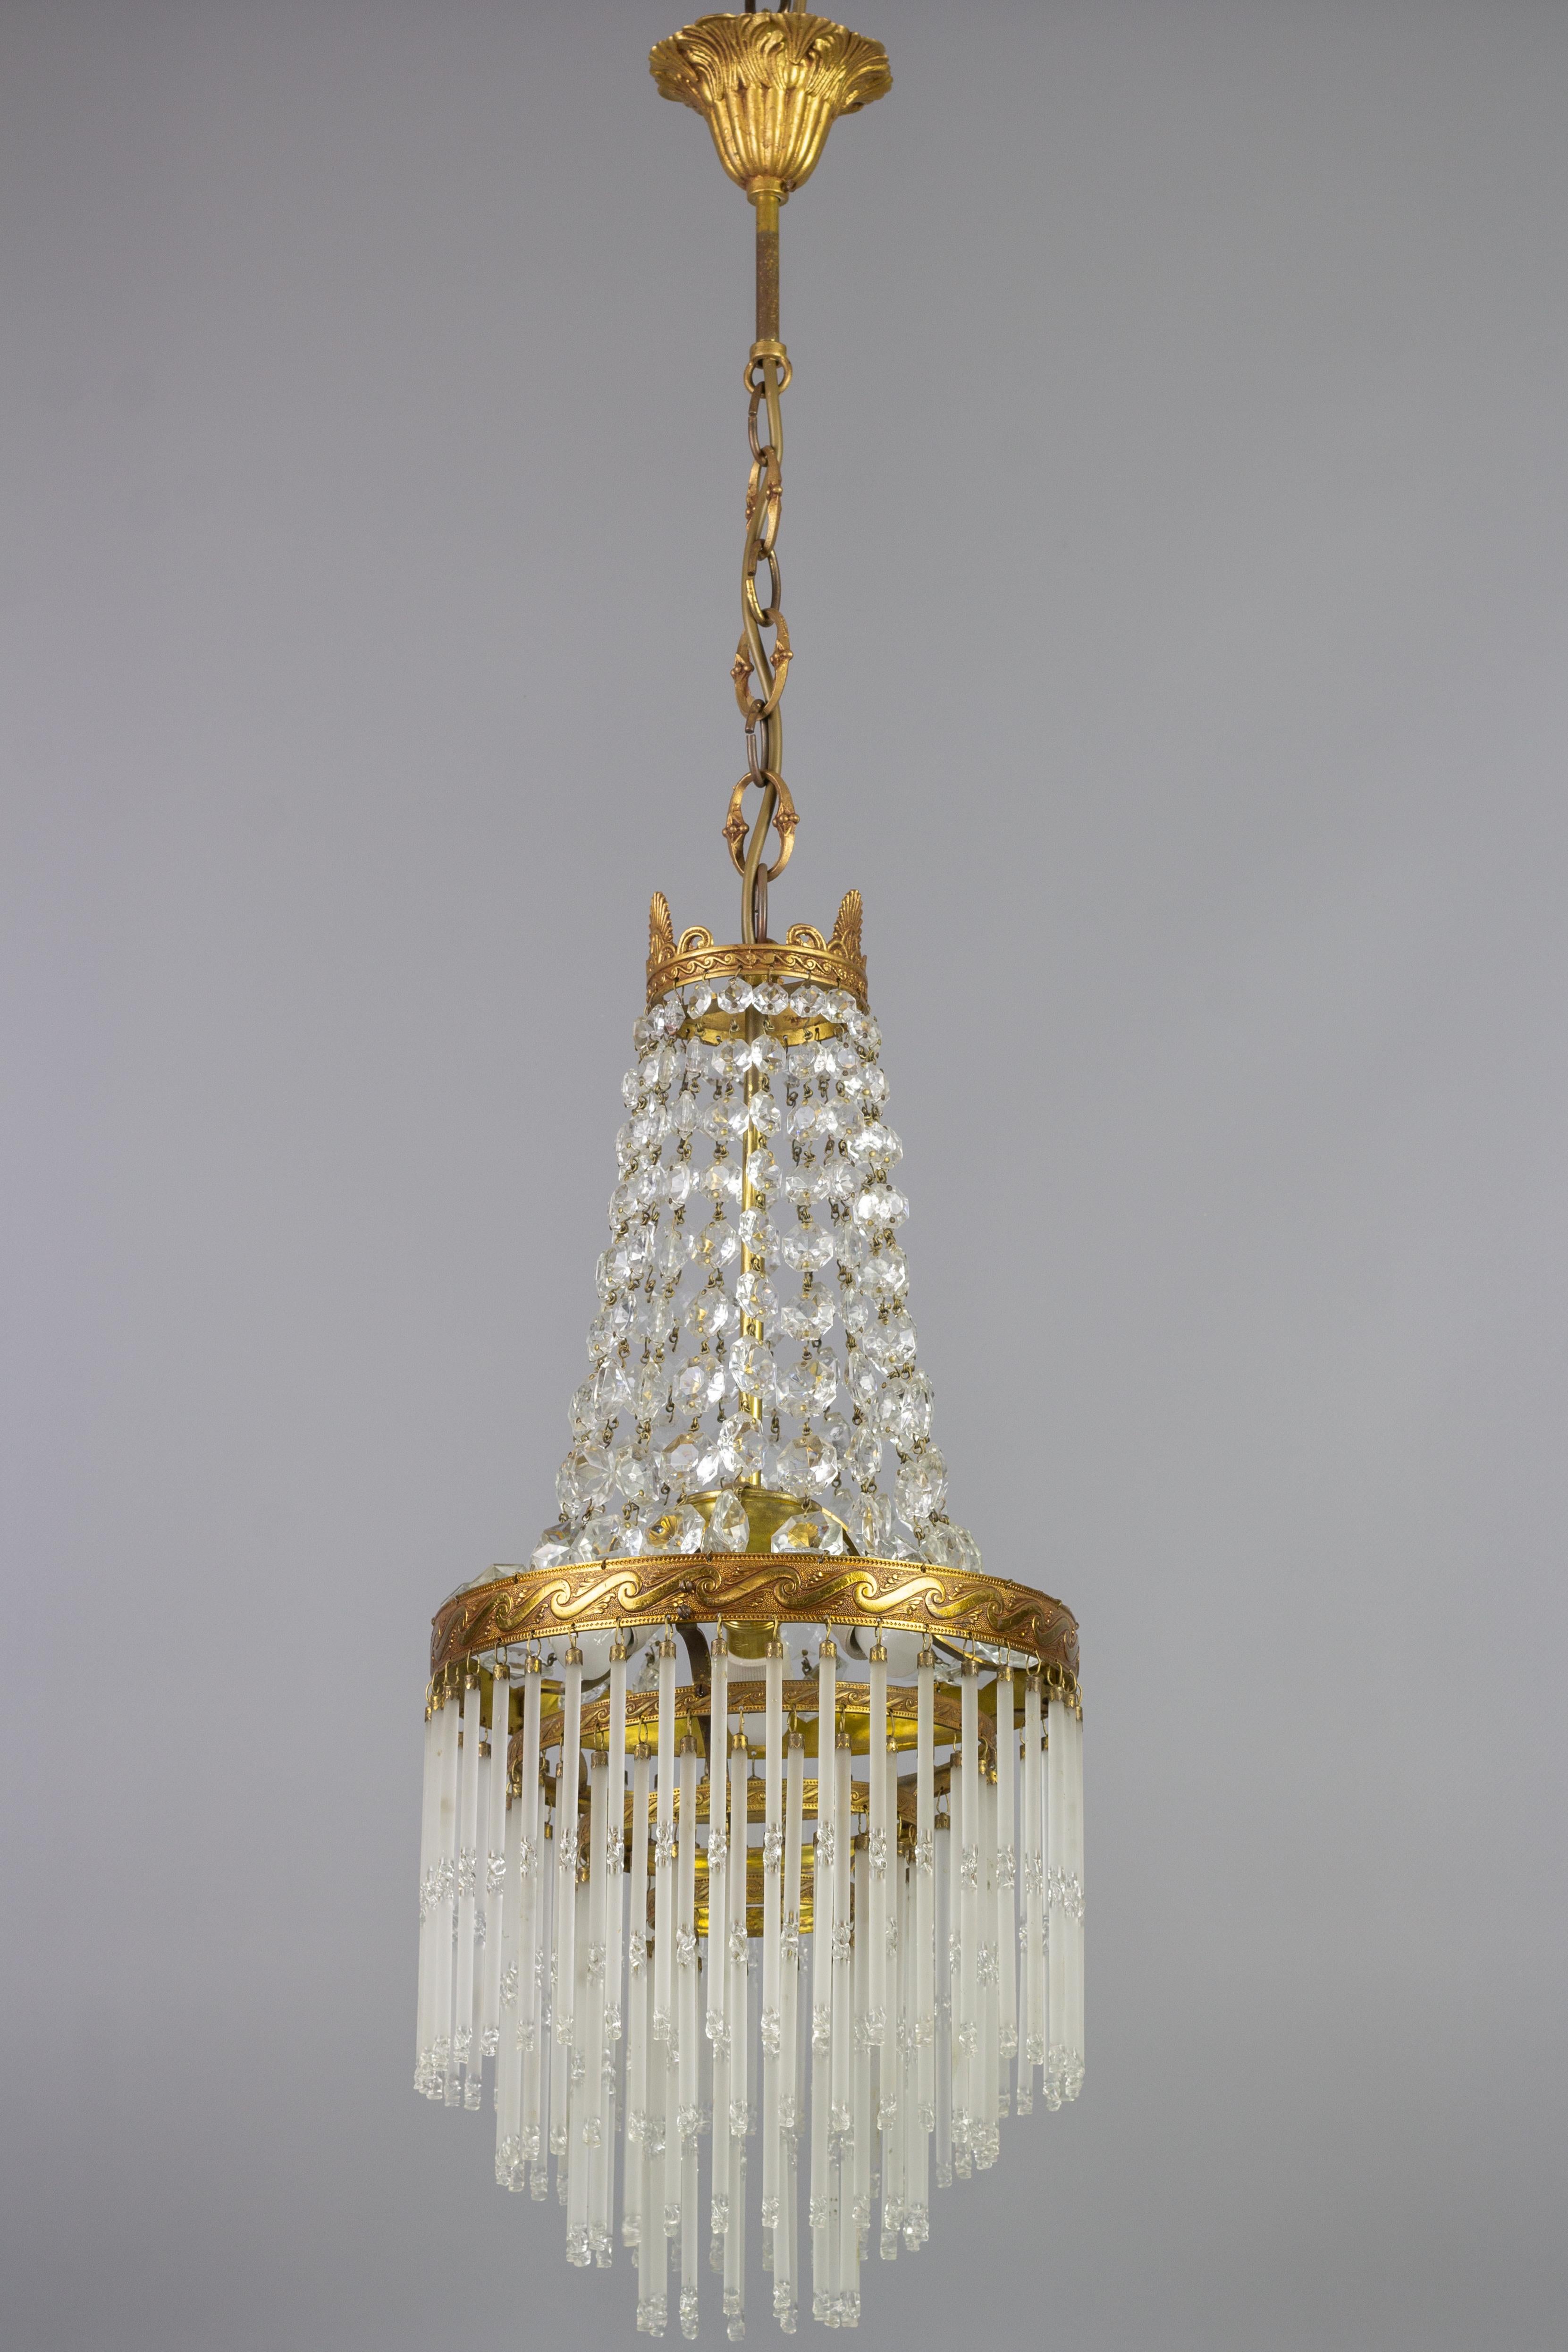 Charming French Art Deco style crystal glass and brass chandelier from the 1950s. This lovely piece has a brass frame hung with chains of crystal glass beads forming a basket and reflecting the light beautifully. Adorned with a brass crown on top